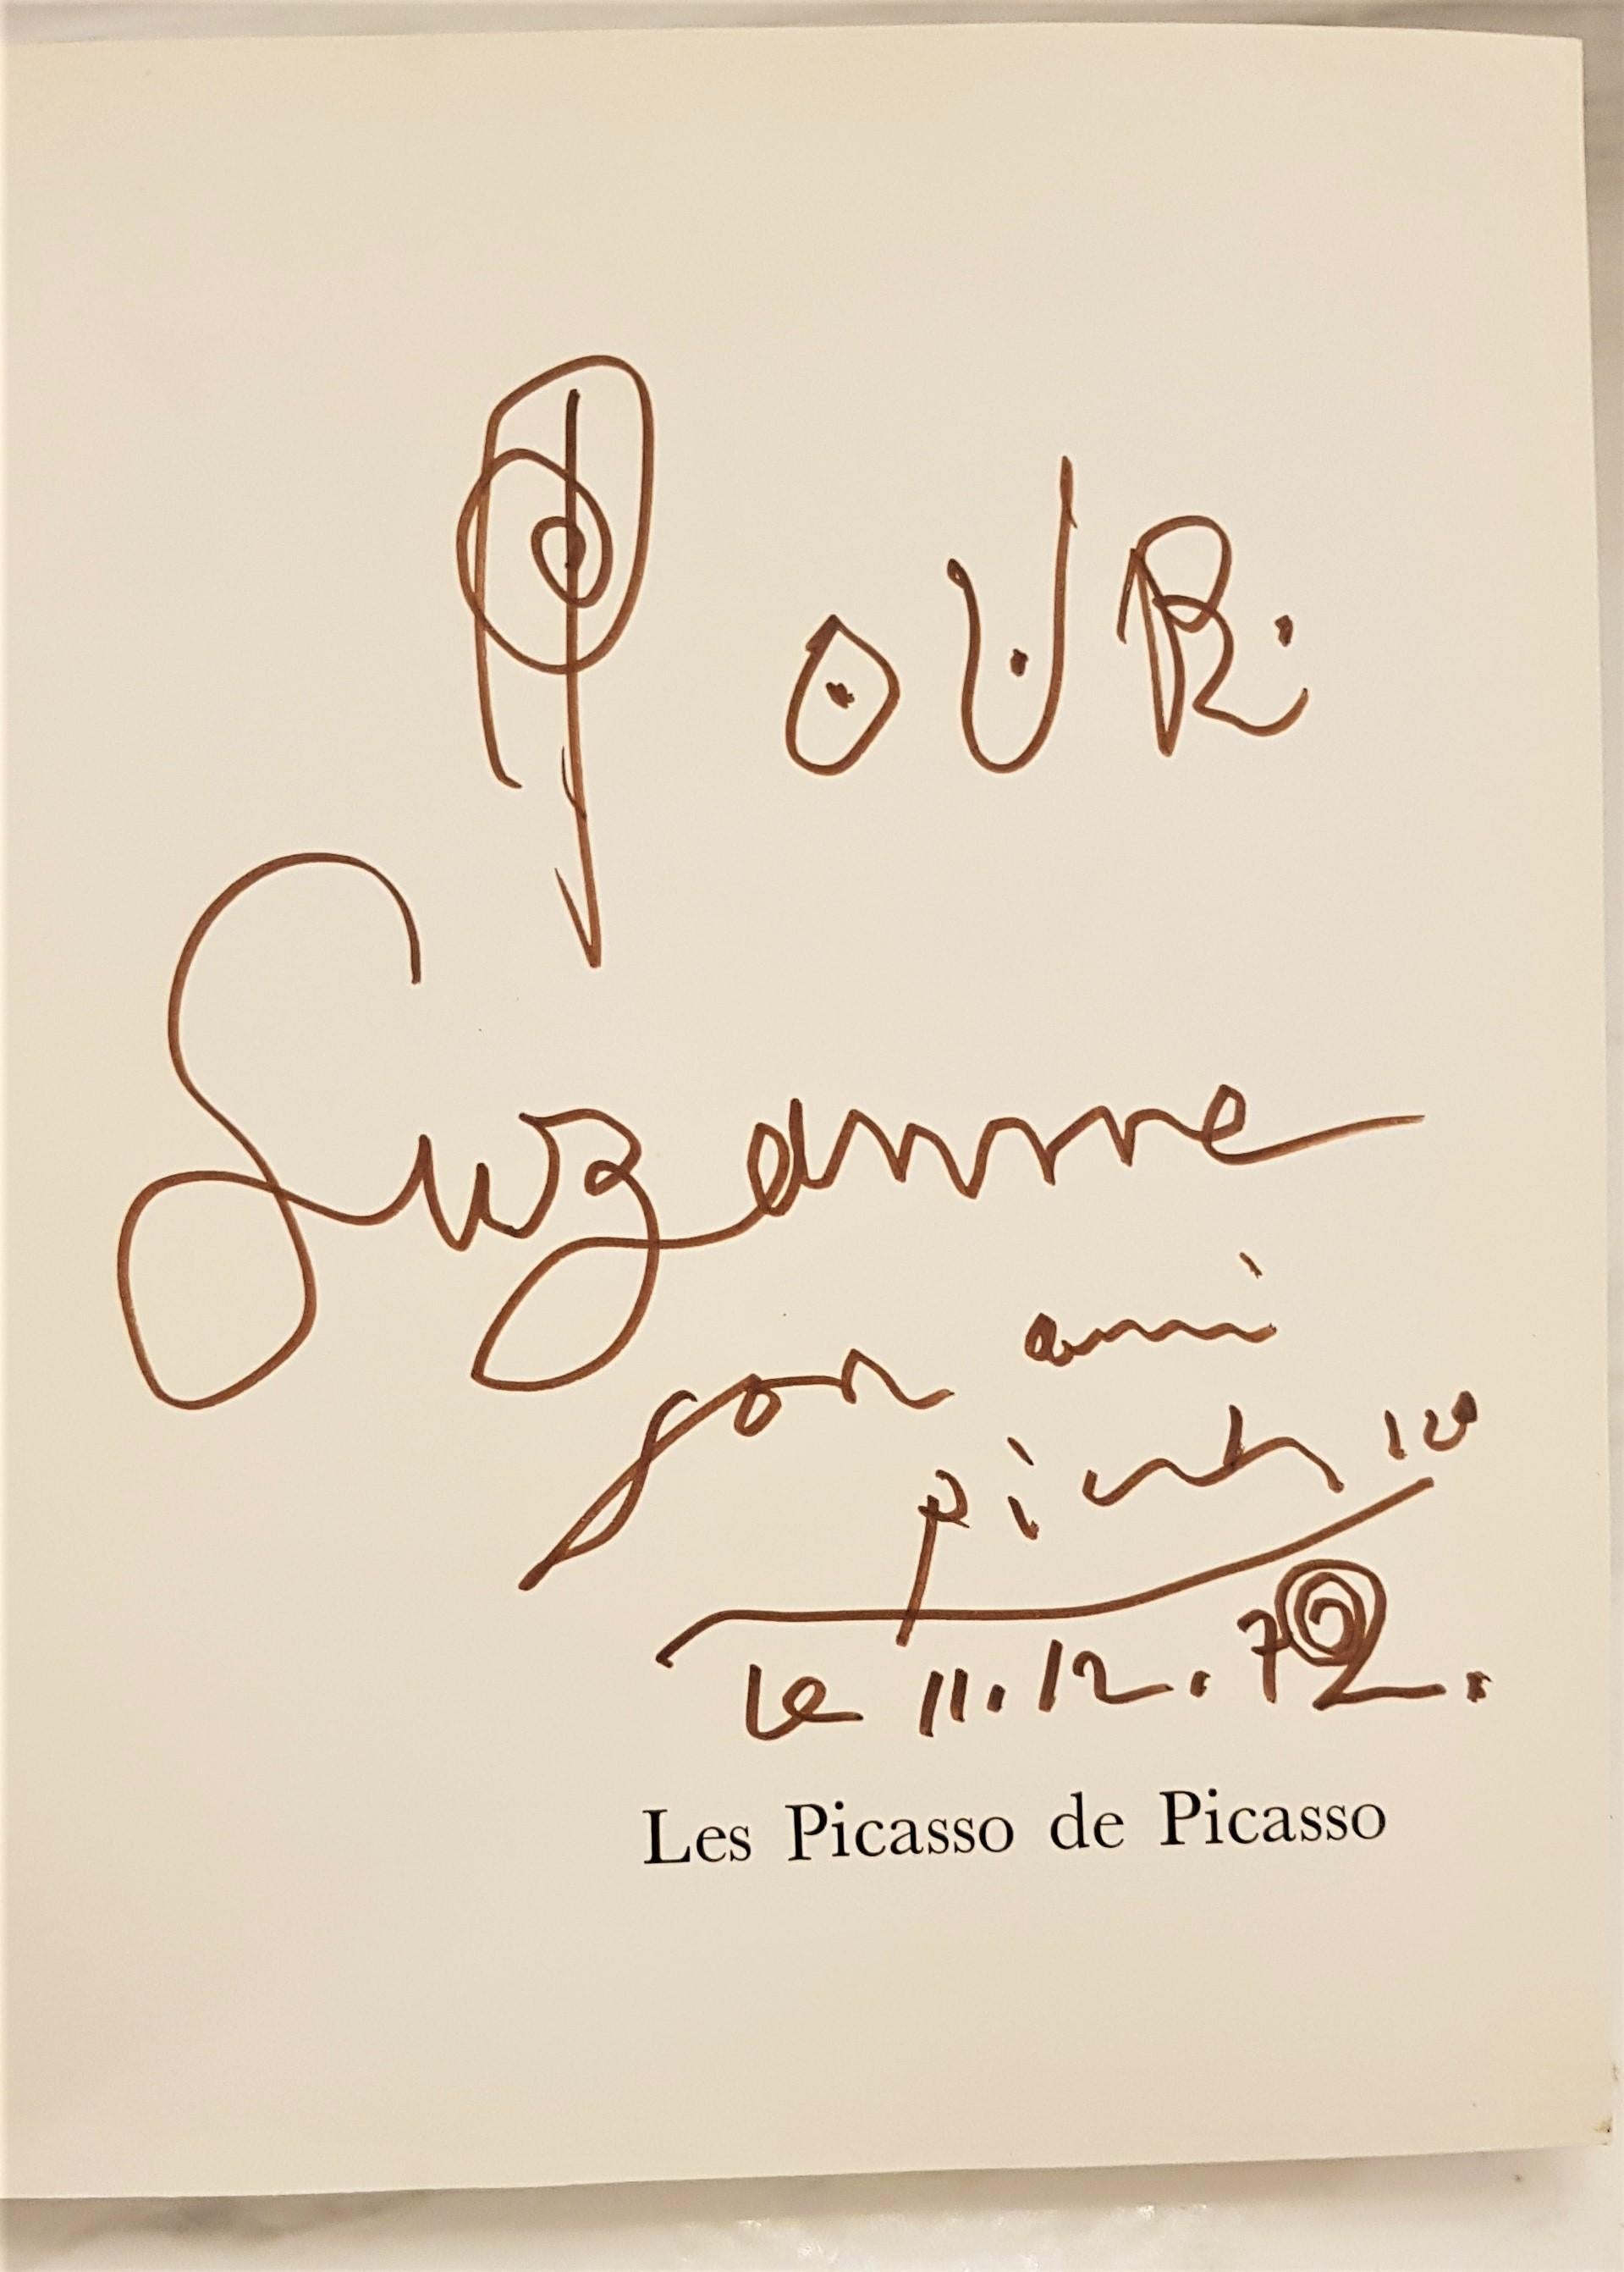 This coffee table book displays beautiful and unique Picasso drawings and illustrations. The cover is inscribed 